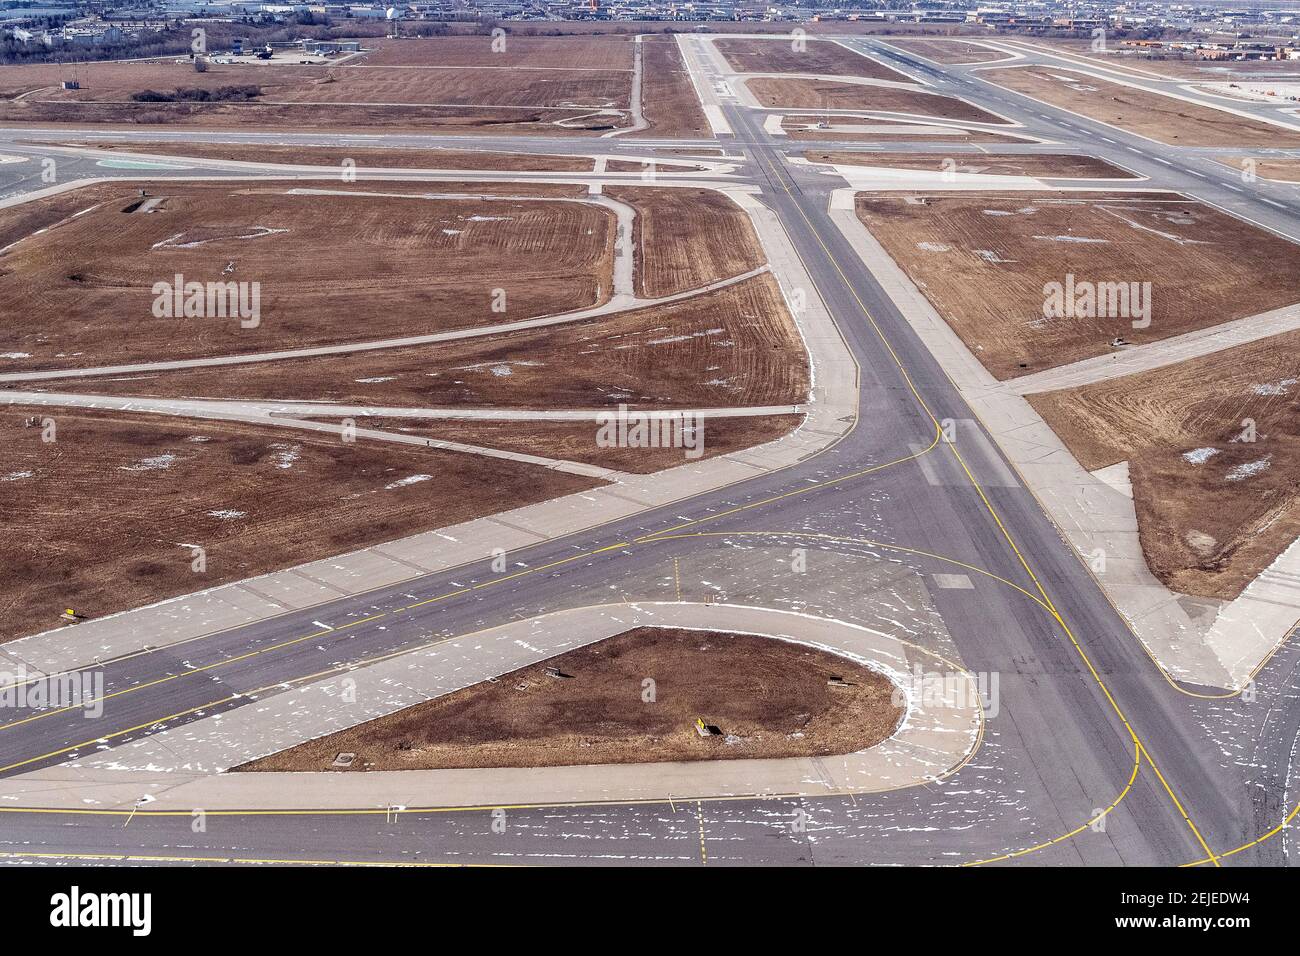 Point of view from a plane taking off from Pearson International Airport, Toronto, Canada Stock Photo